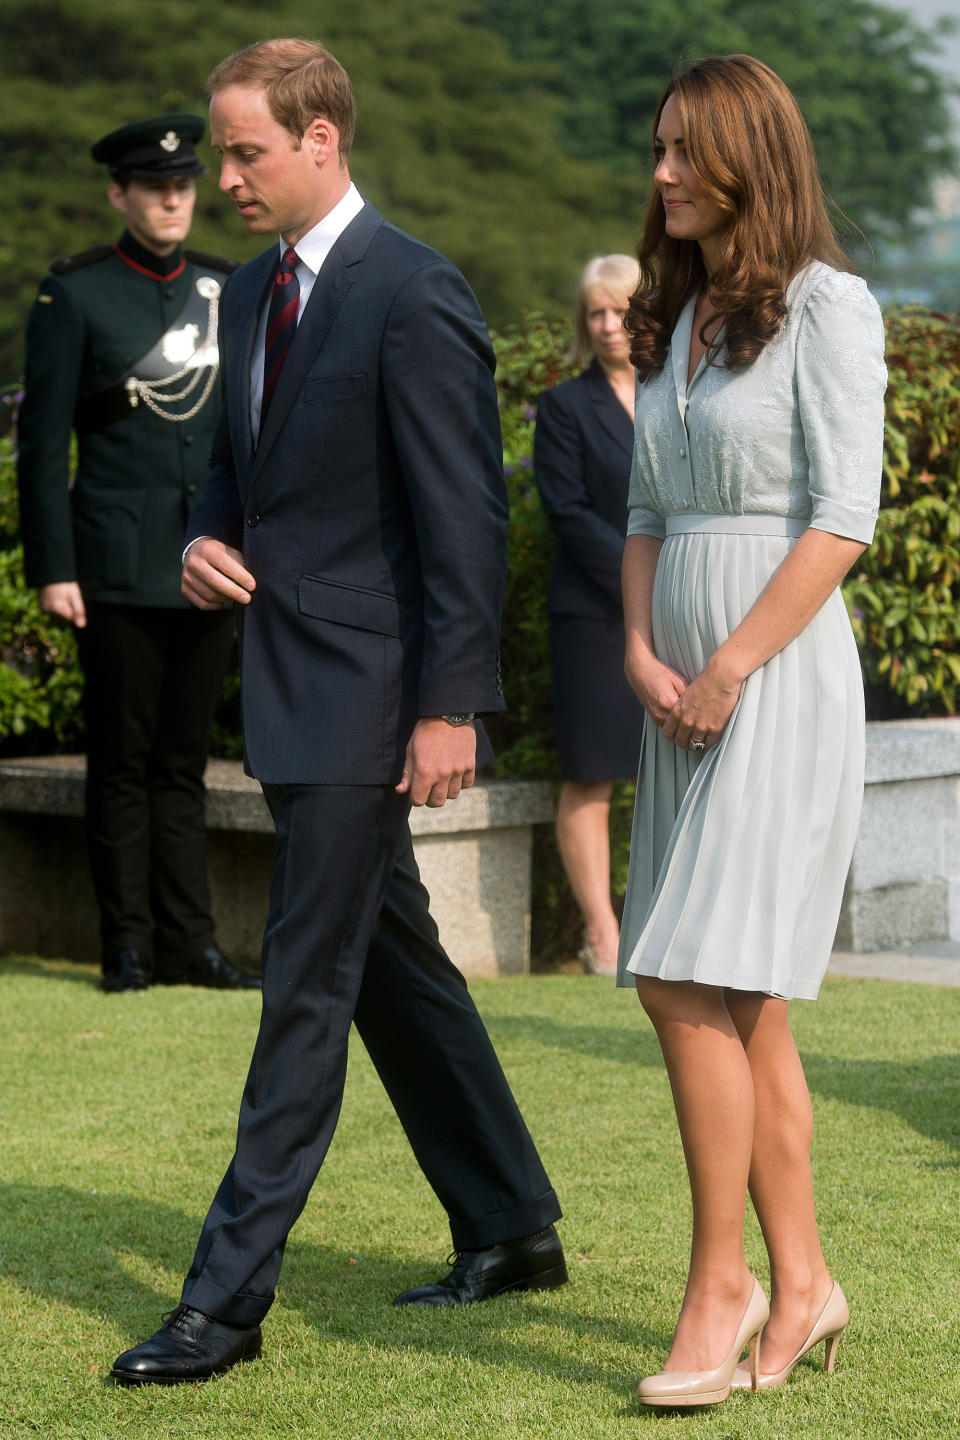 FILE - In this Thursday, Sept. 13, 2012 file photo, Britain's Prince William and his wife Kate, the Duke and Duchess of Cambridge, walk together as they visit the Kranji Commonwealth War Memorial in Singapore. Prince William and his wife Catherine are expecting their first child. St. James’s Palace announced the pregnancy Monday, saying that the Duchess of Cambridge, formerly known as Kate Middleton has a severe form of morning sickness and is currently in a London hospital. William is at his wife’s side. (AP Photo/Nicolas Asfouri, Pool, File)